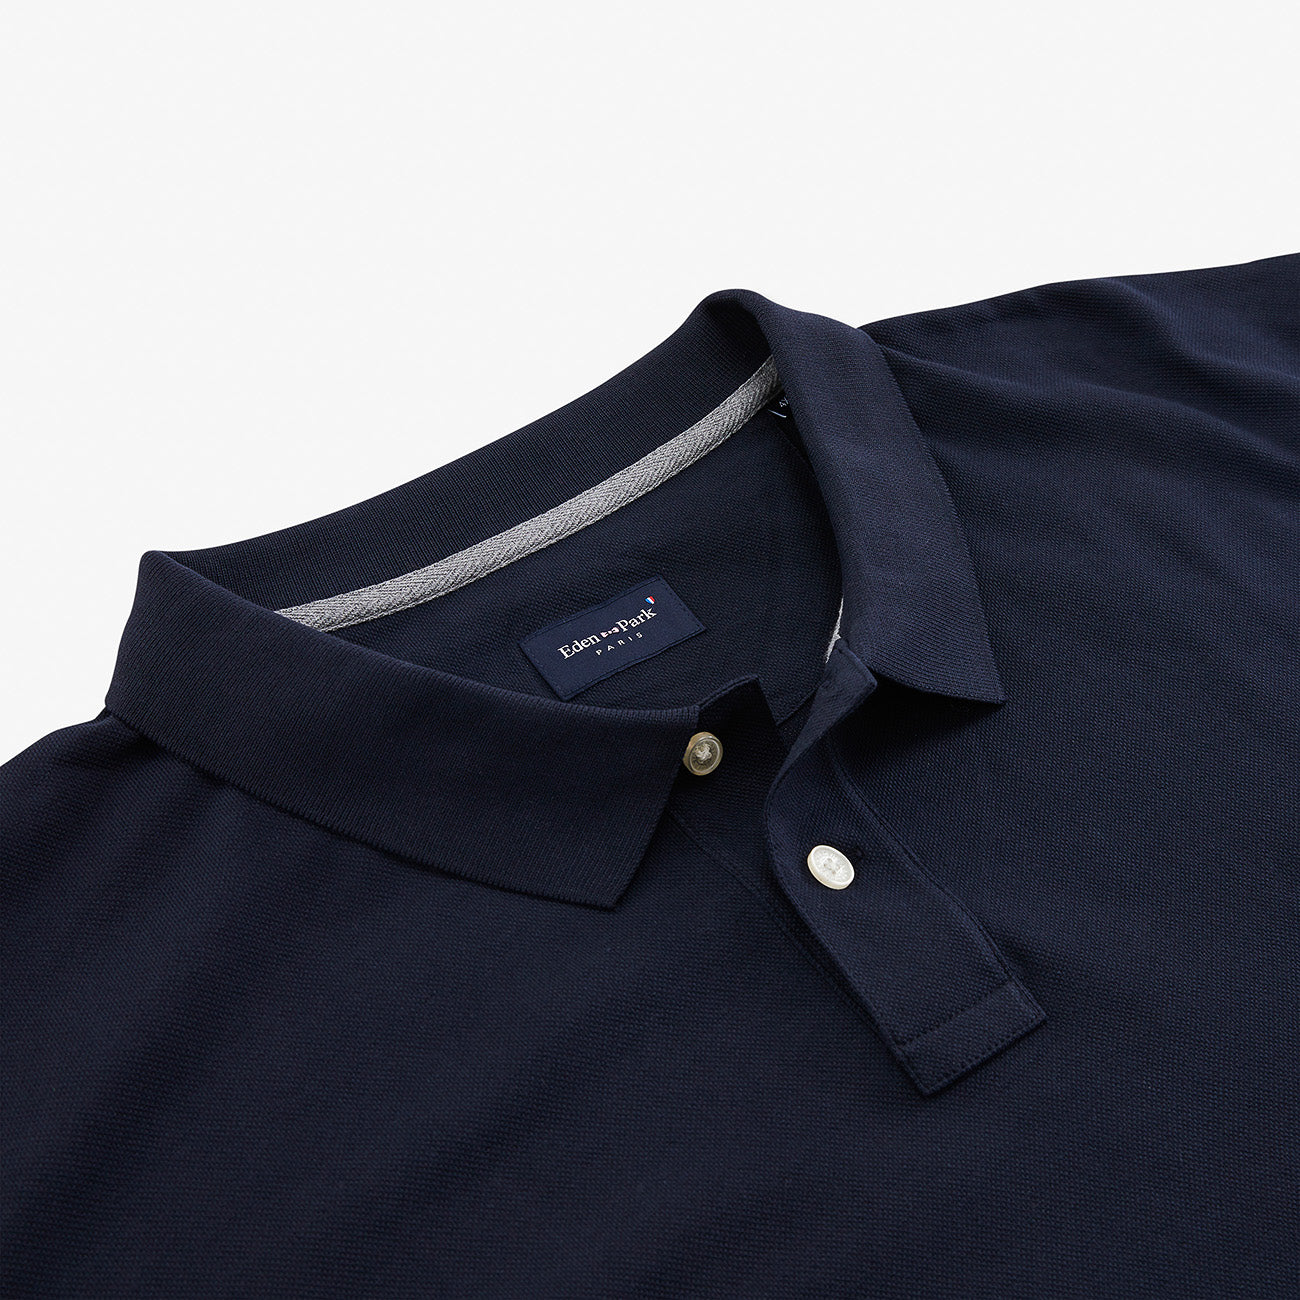 Eden Park Polo Shirt In Regular Fit.  Marine Blue - The Short Sleeve Classic Polo.